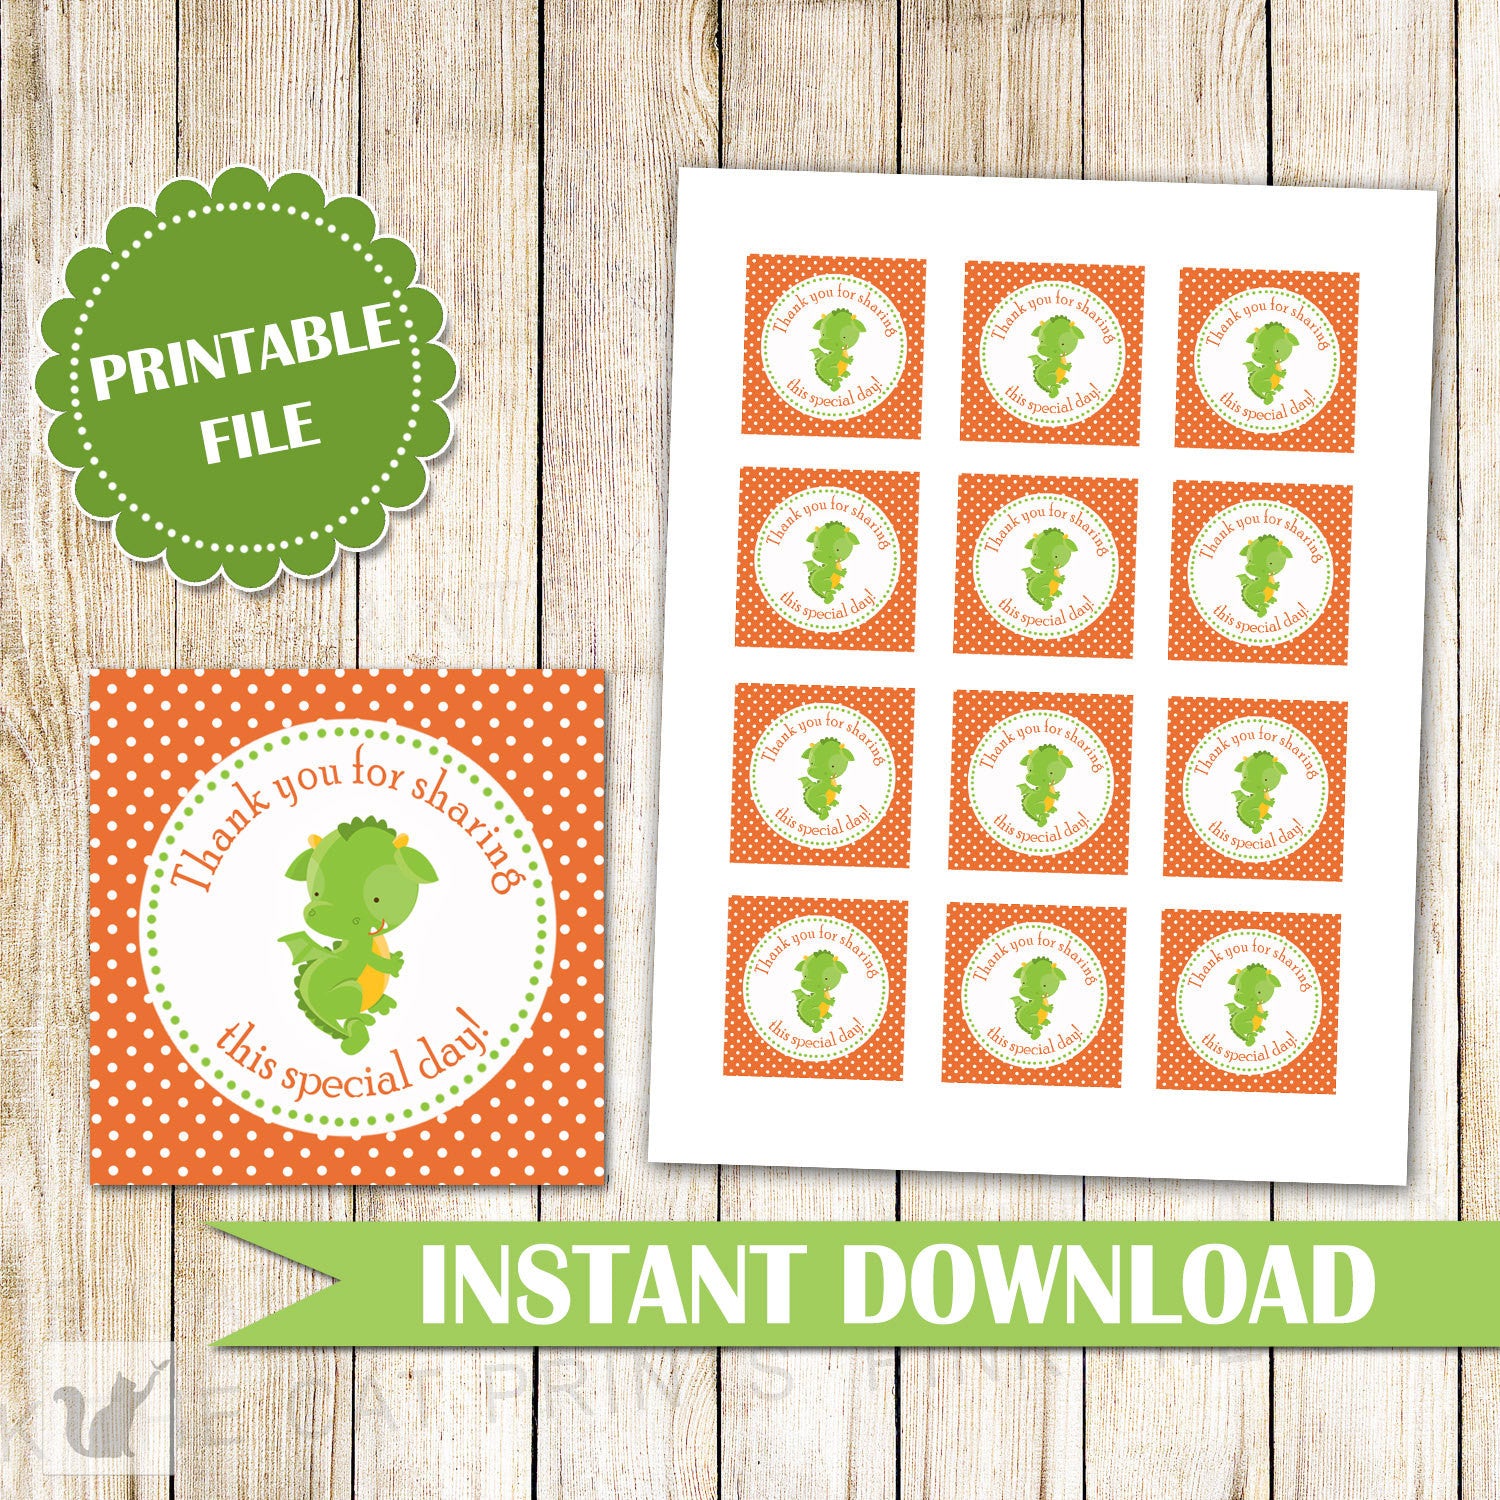 INSTANT DOWNLOAD Green Dragon Party Thank You Tag - Orange Polka Dot Square  Tag Birthday Party Favor Baby Shower Favor DIY Party Decoration